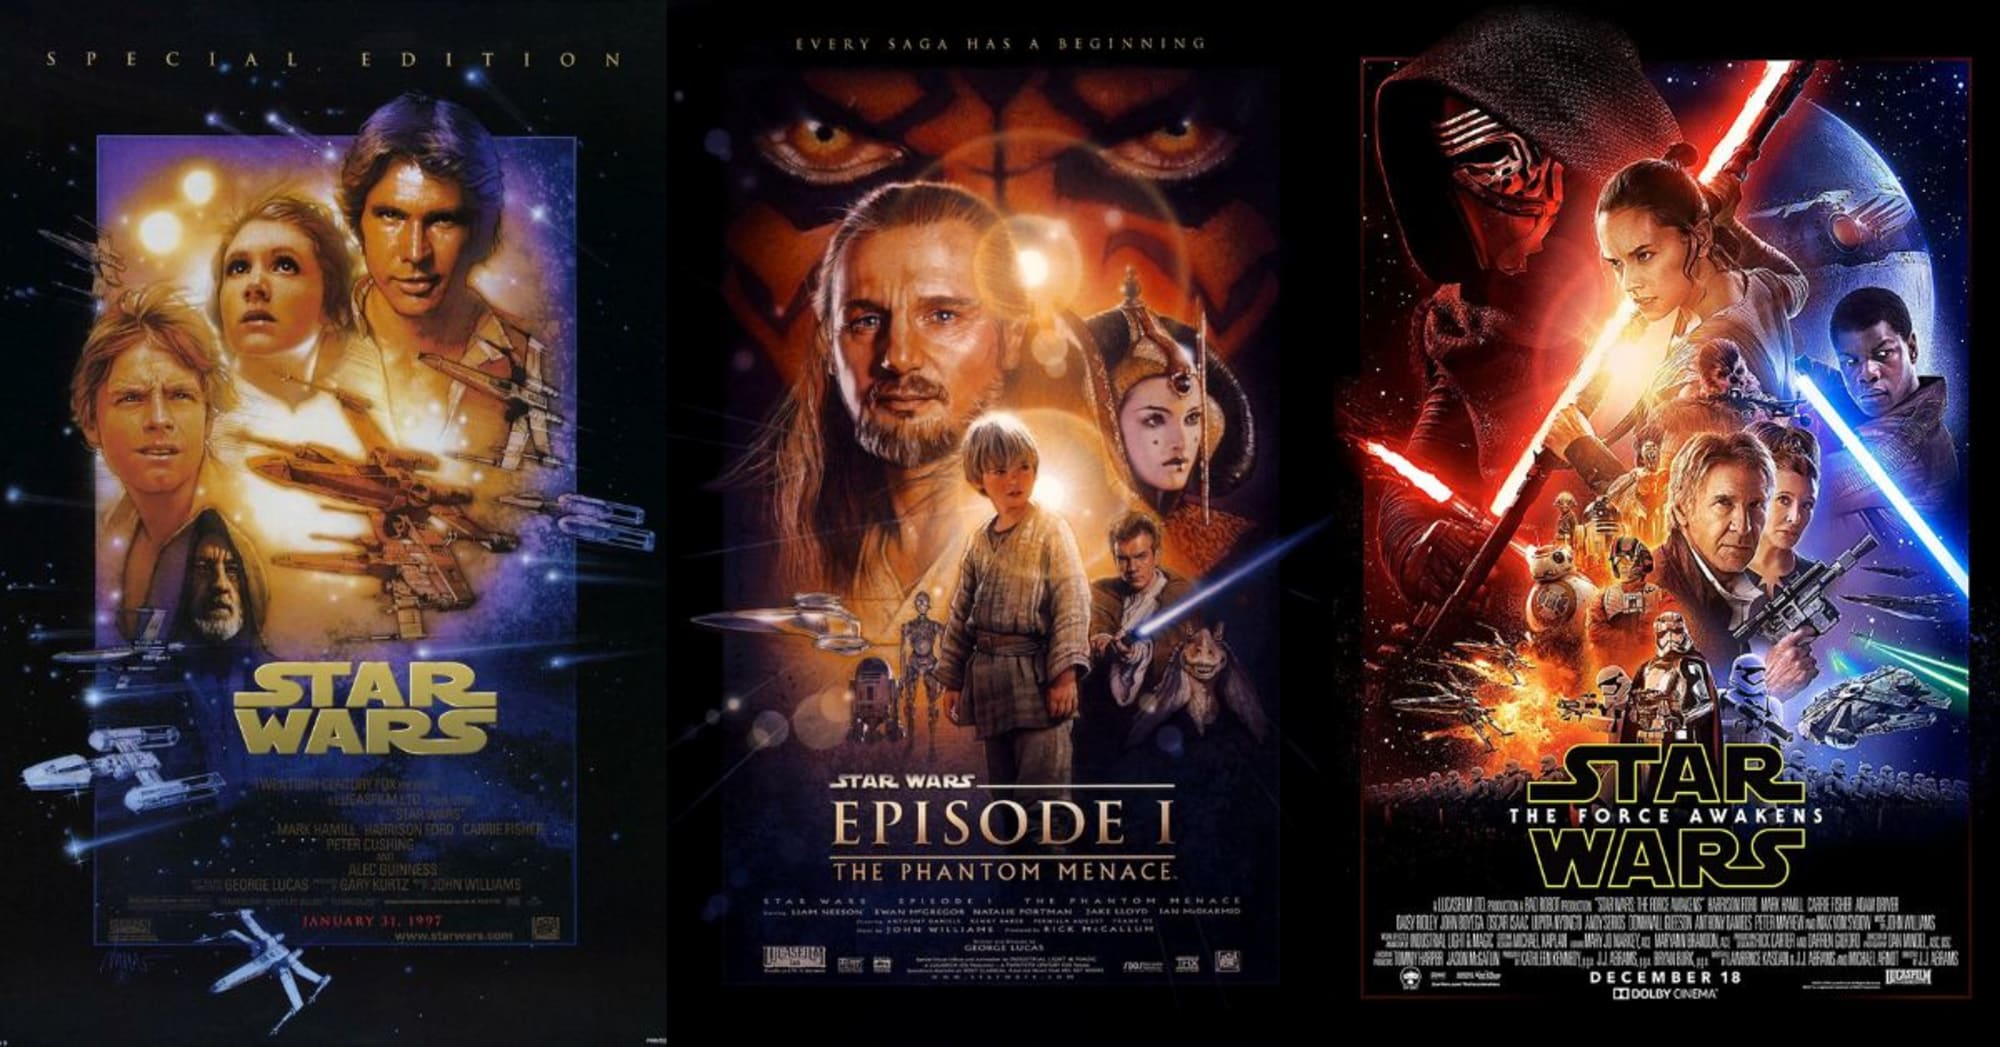 The 25 most iconic Star Wars movie posters of all time - Flipboard